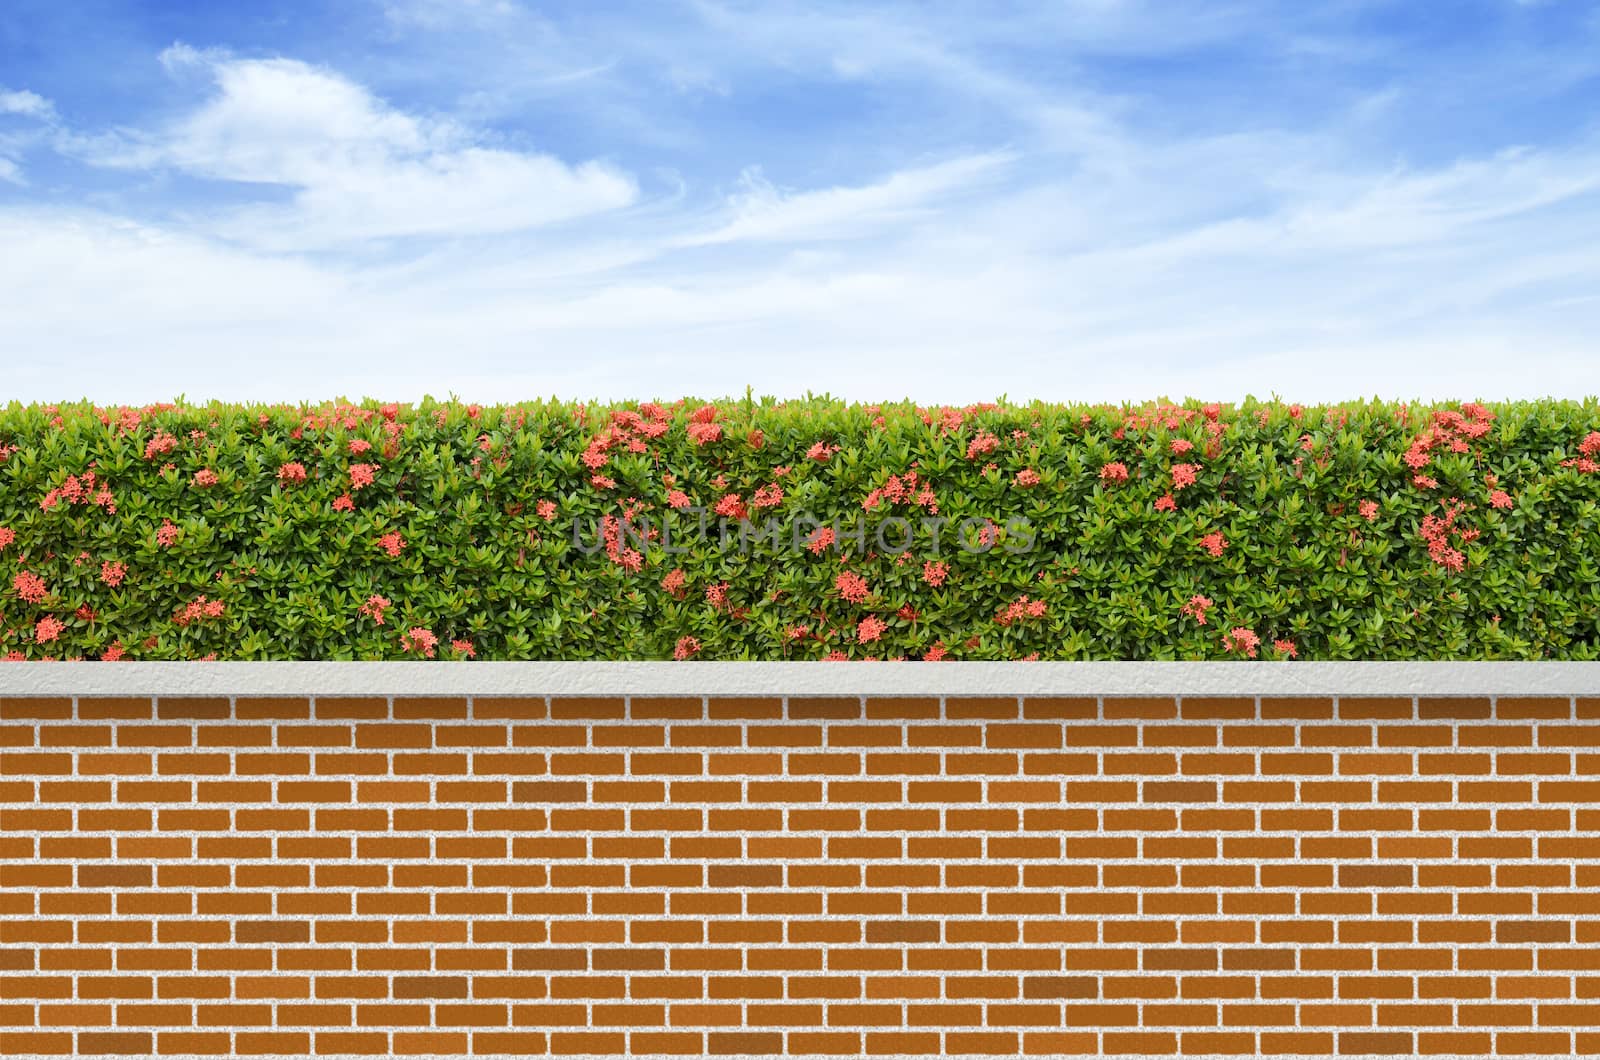 shrubs and brick fence on blue sky background